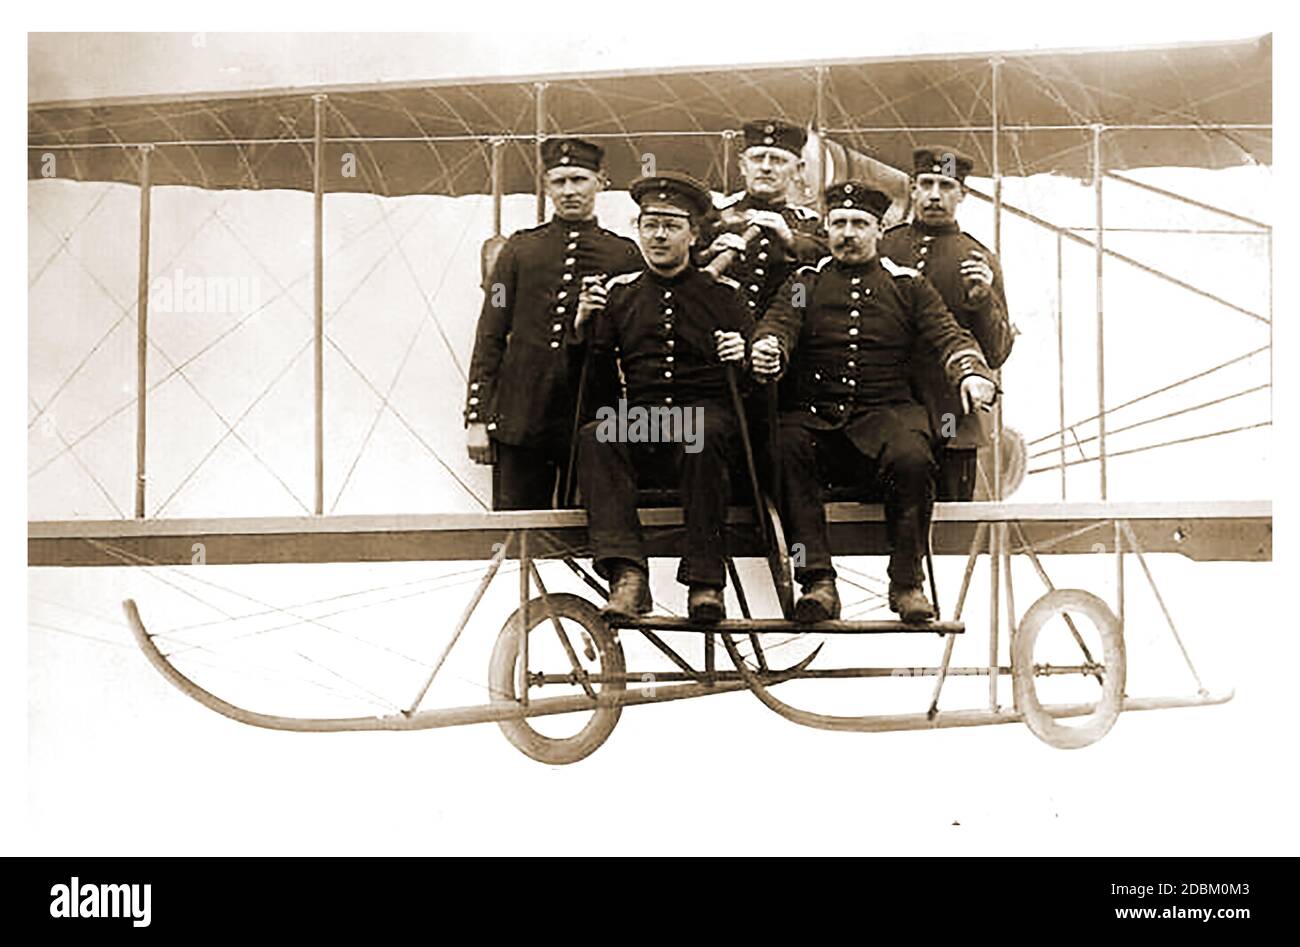 WWI  - Deutsche Luftstreitkräfte aka Die Fliegertruppen des deutschen Kaiserreiches , Imperial German Flying Corps or Die Fliegertruppe . A rare  old photograph of 5 members of Germany's early aerial military squad flying in an experimental  lighter-than -air biplane craft.  World War One airplanes began as primitive, unarmed artillery spotters and developed into  powerful bombers and  fighters Stock Photo